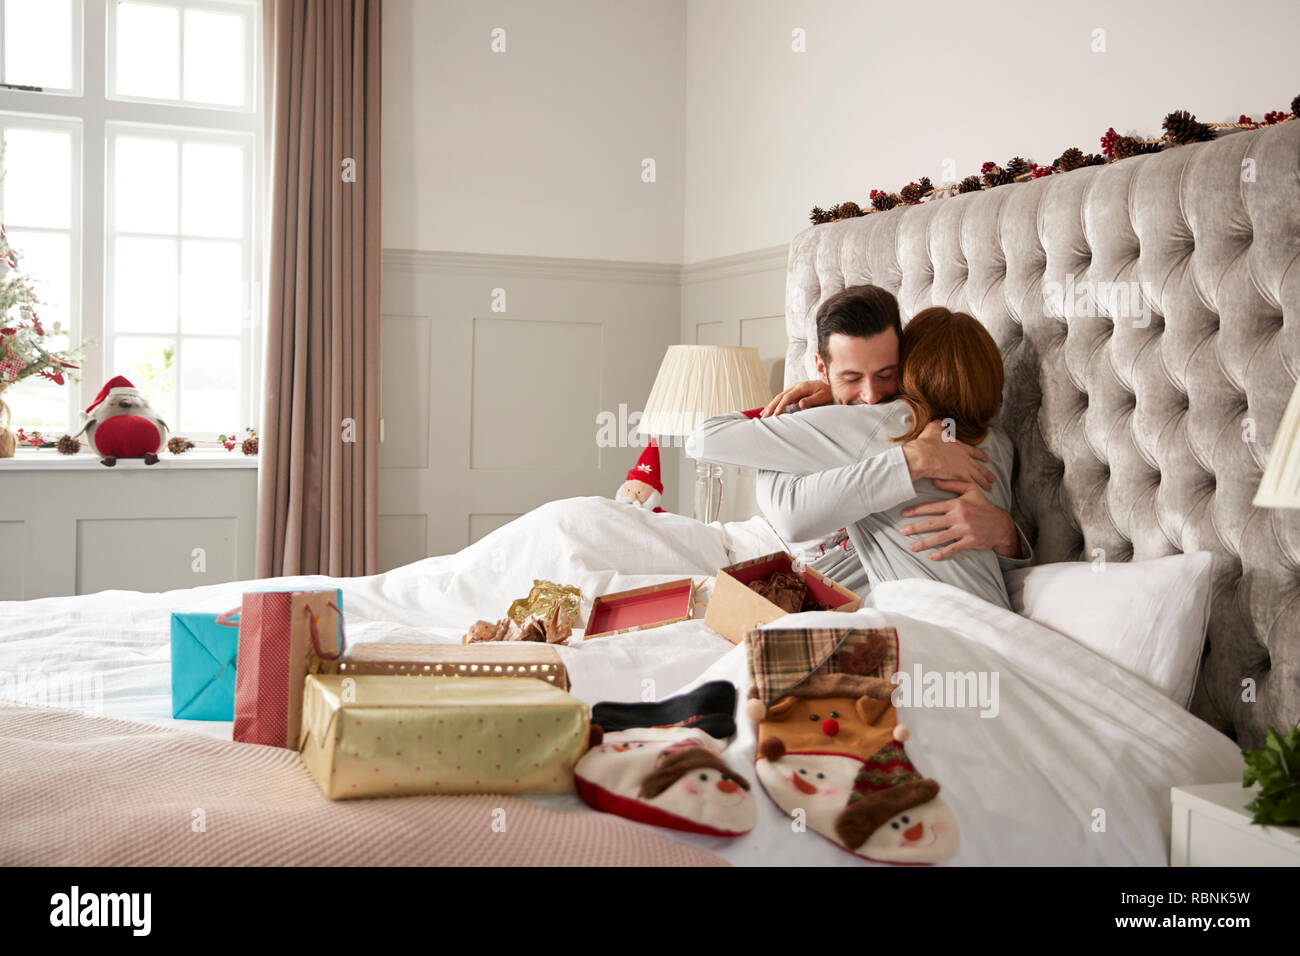 Couple Hugging In Bed At Home As They Exchange Gifts On Christmas Day Stock Photo